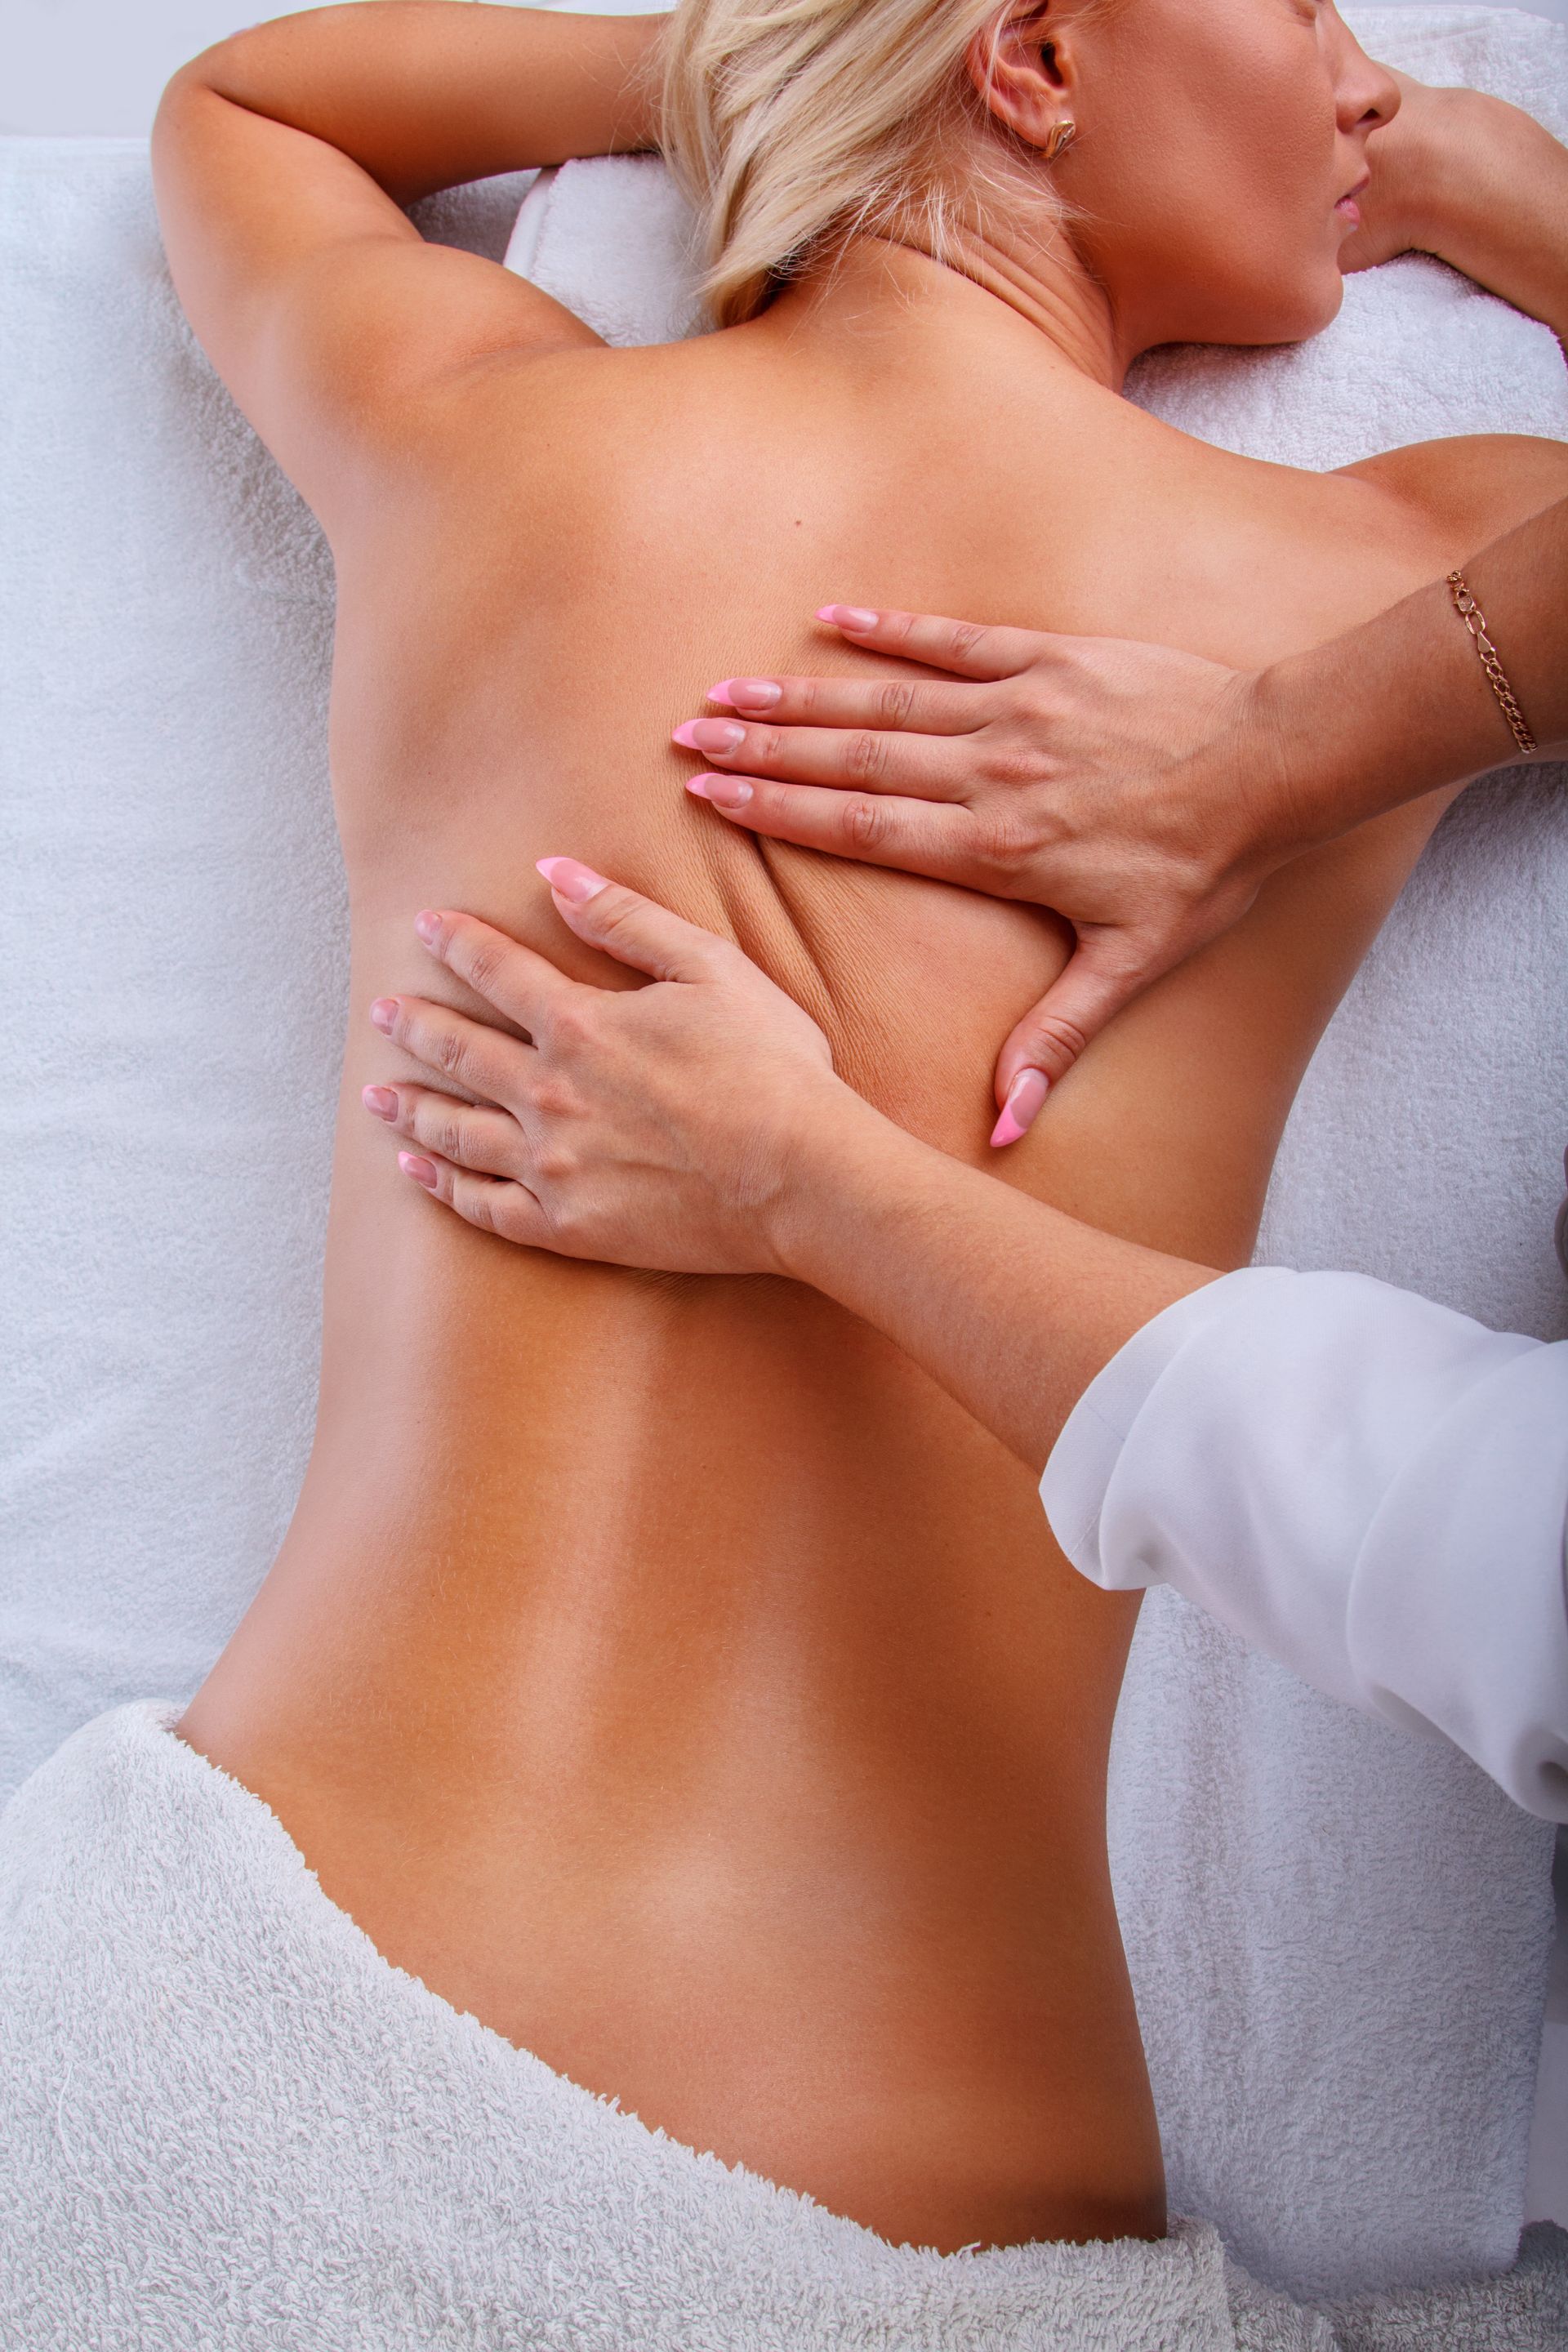 a woman is getting a massage on her back at a spa .